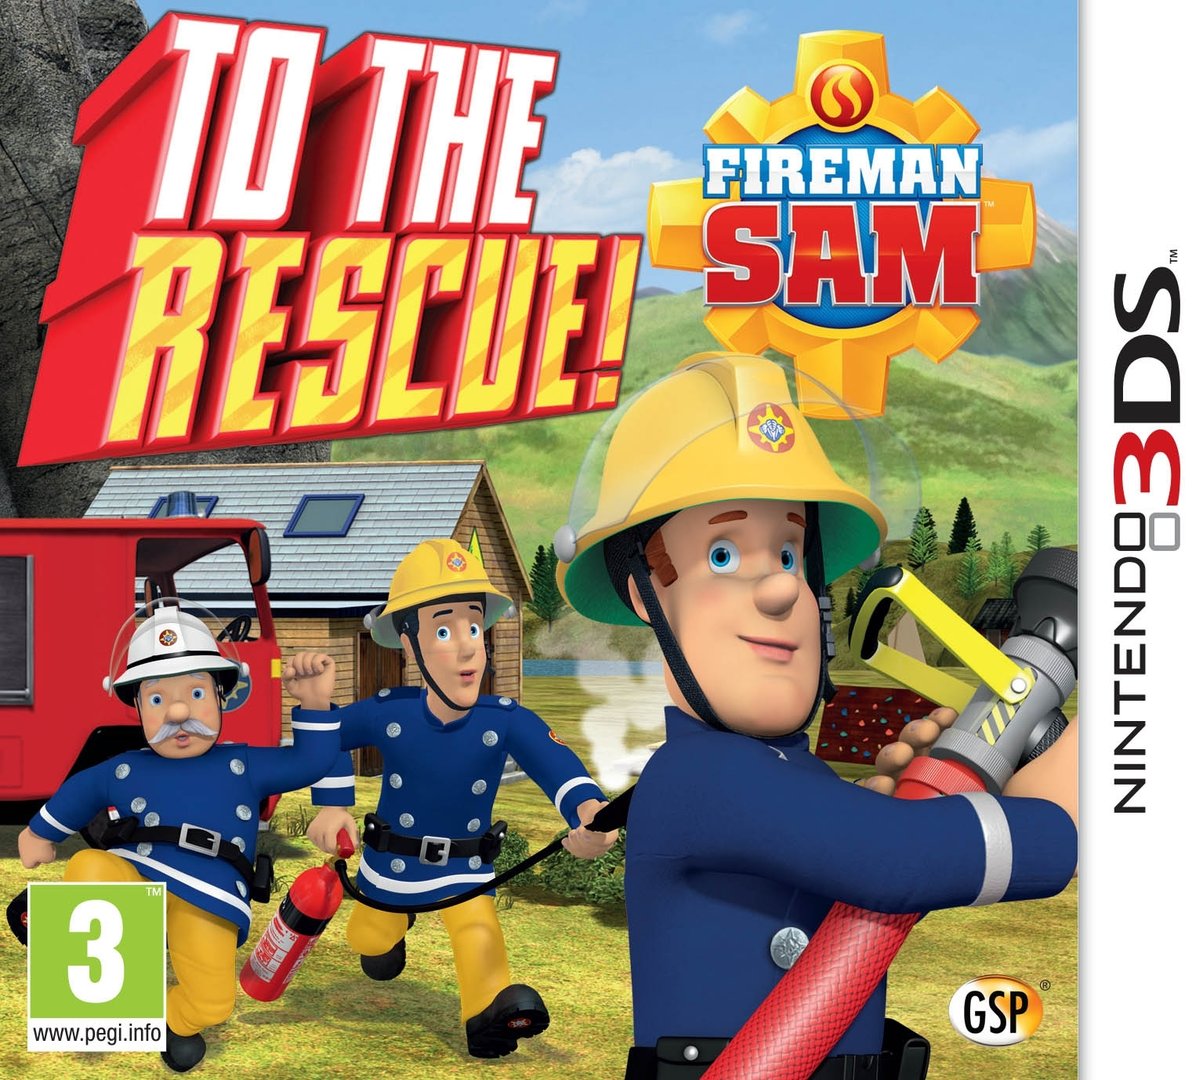 Brandweerman Sam: To The Rescue! (3DS), GSP